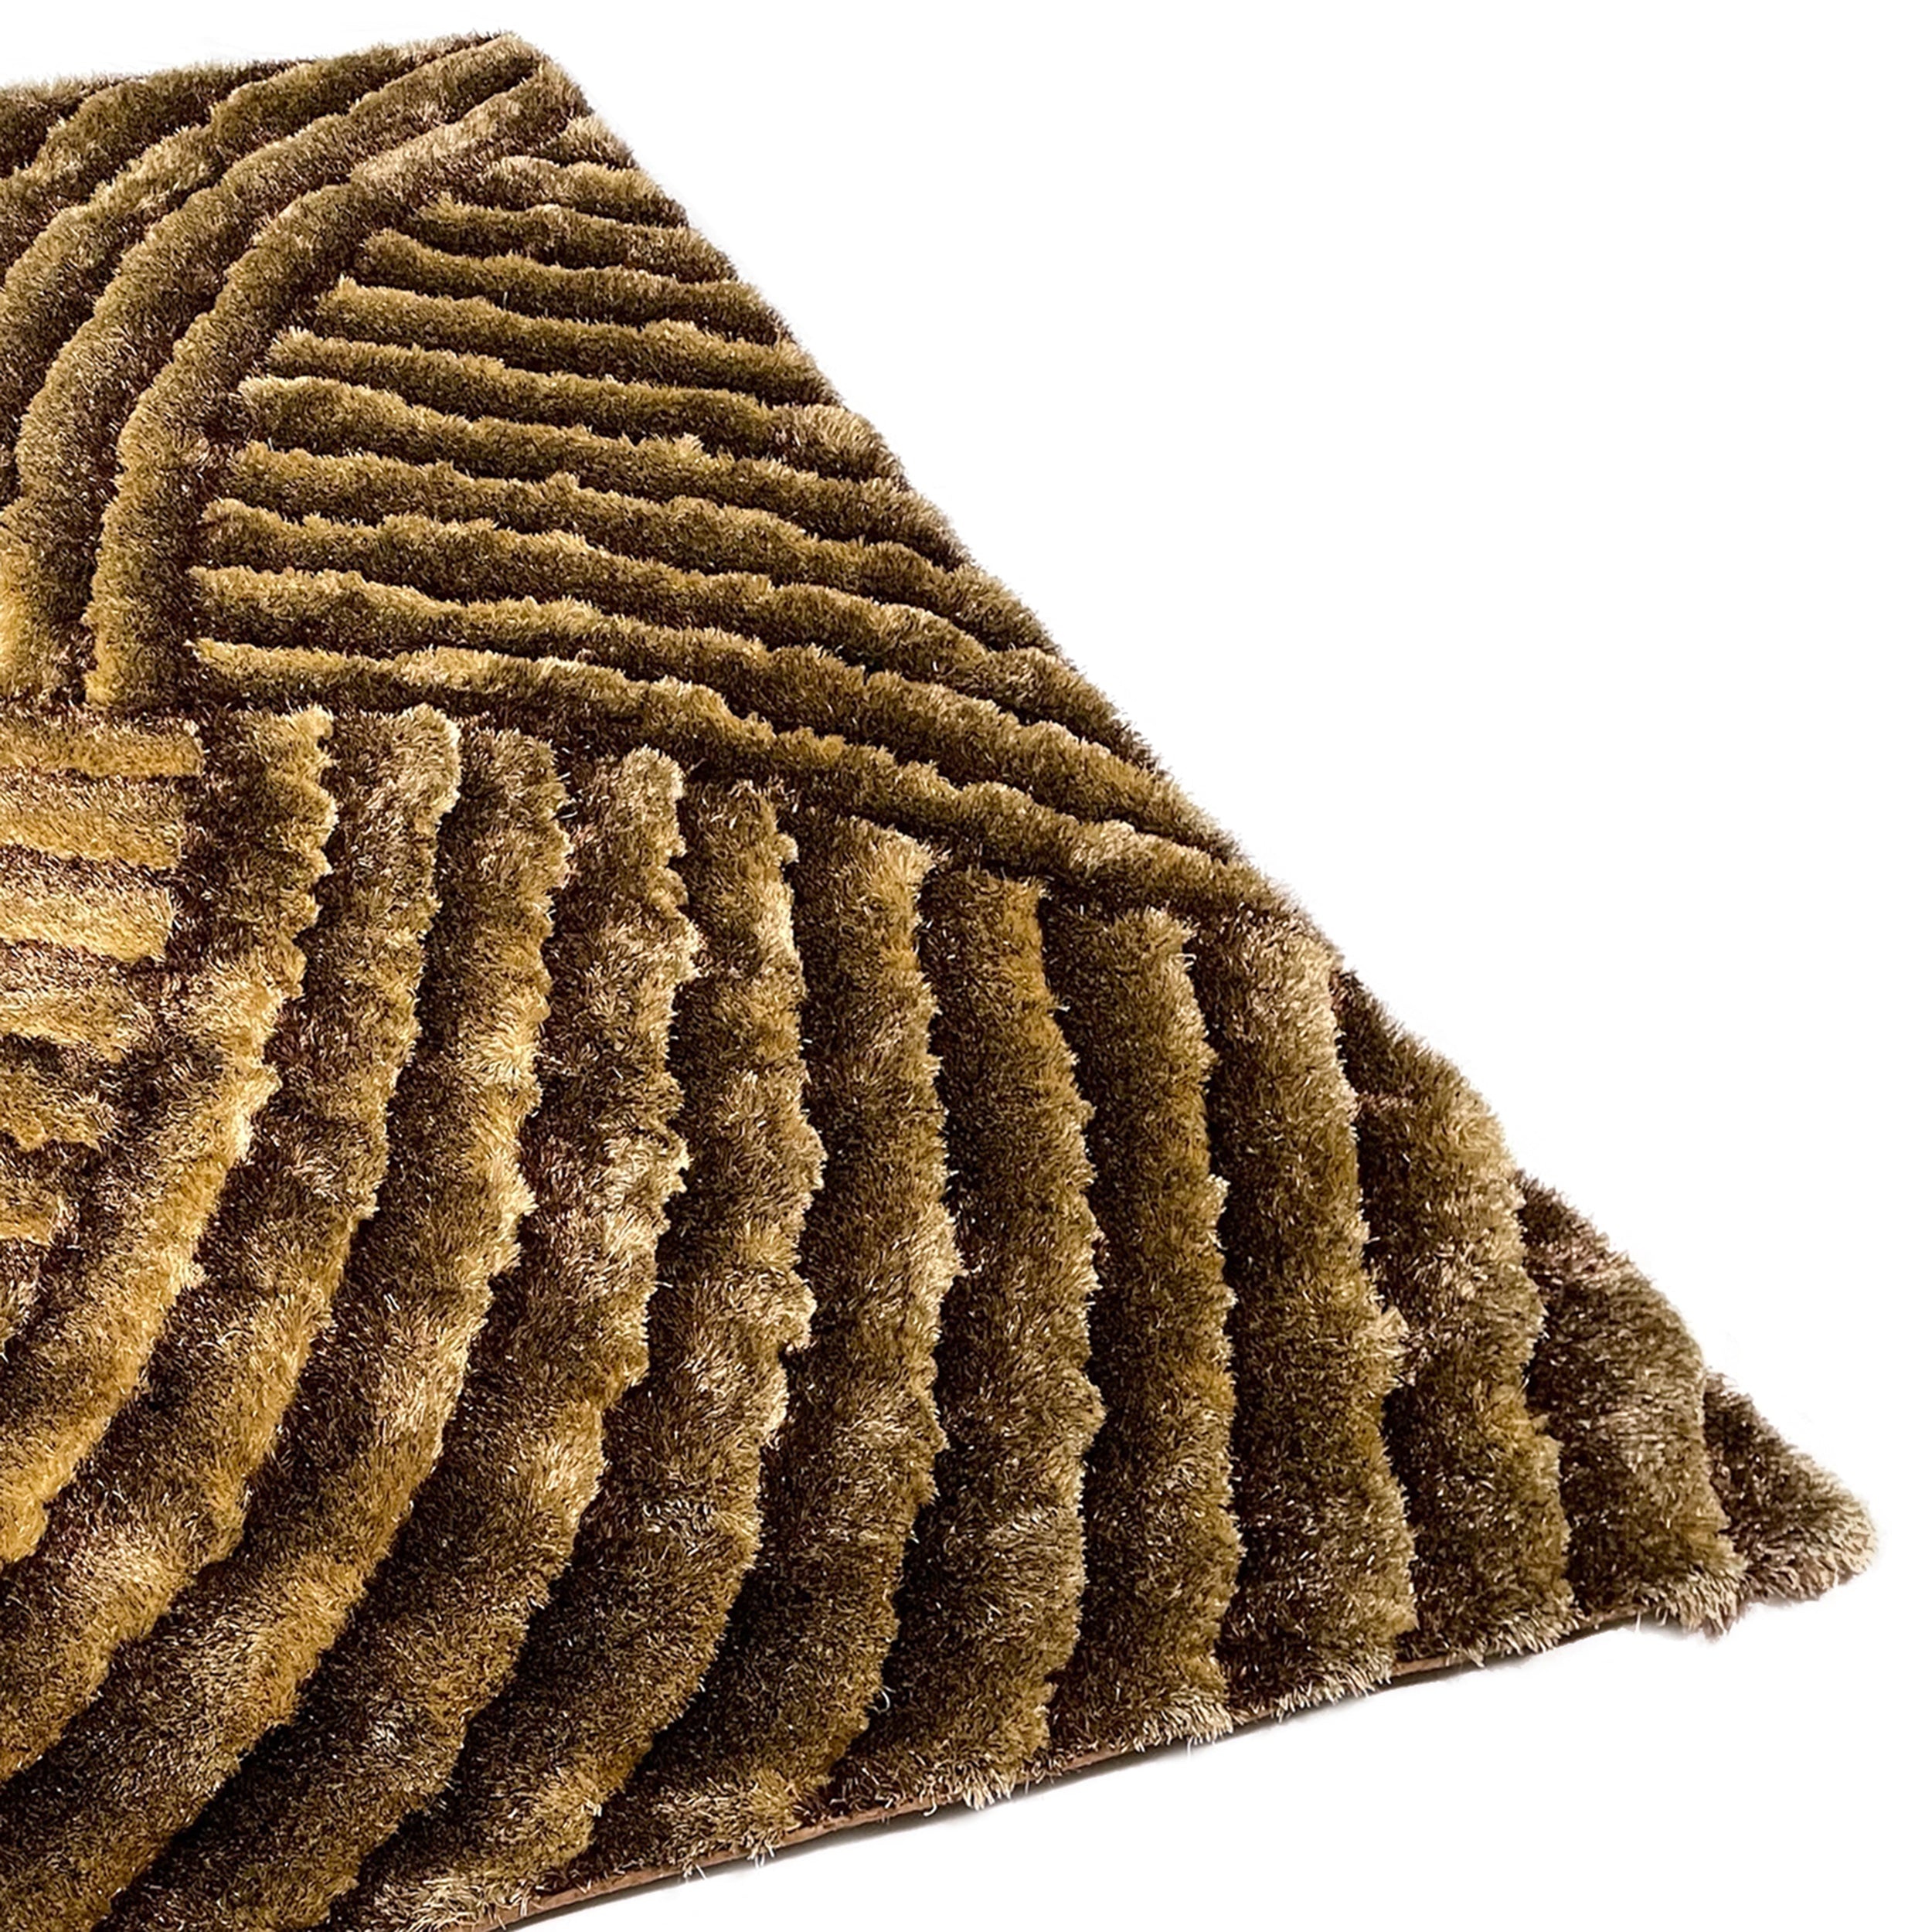 3D 259 Abstract Shaggy Modern Contemporary Area Rug Brown Laruglinens